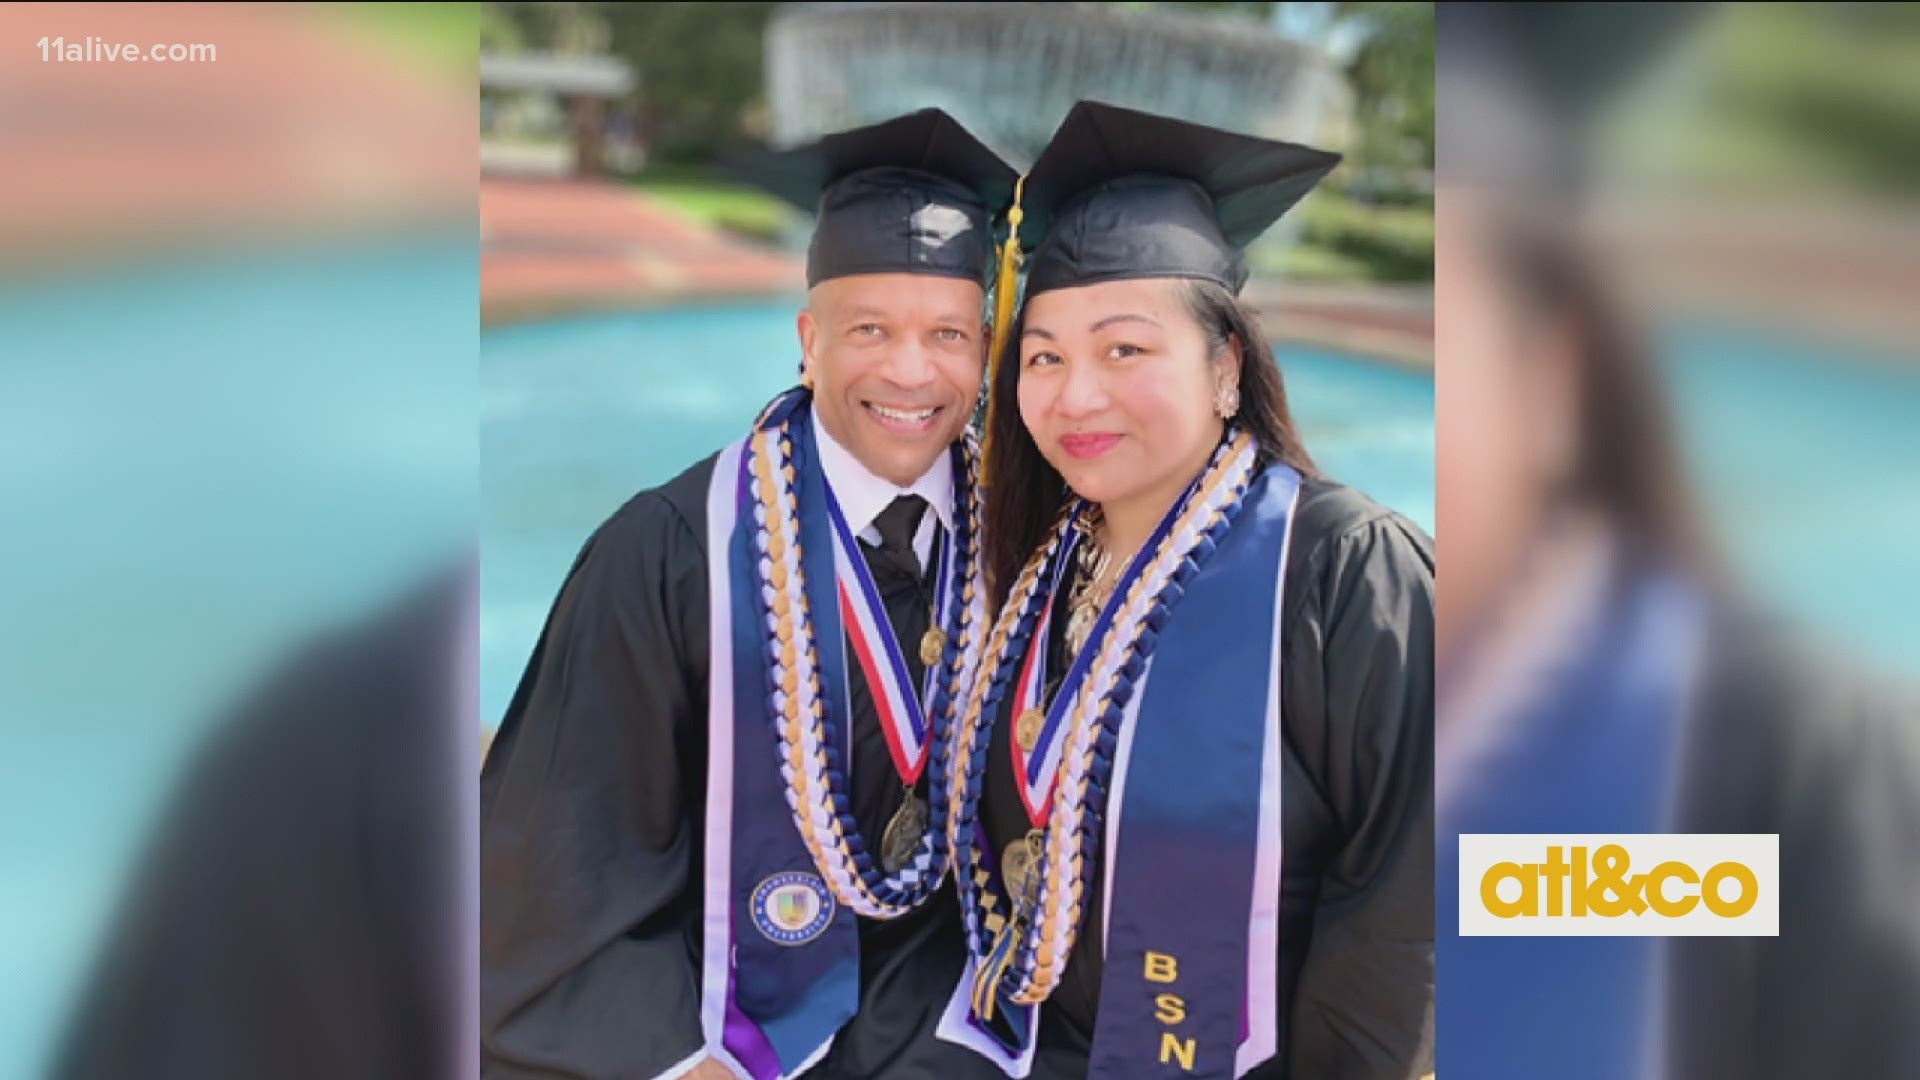 What a dream team! A married couple serving in the military both go on to graduate in nursing at the top of their class.